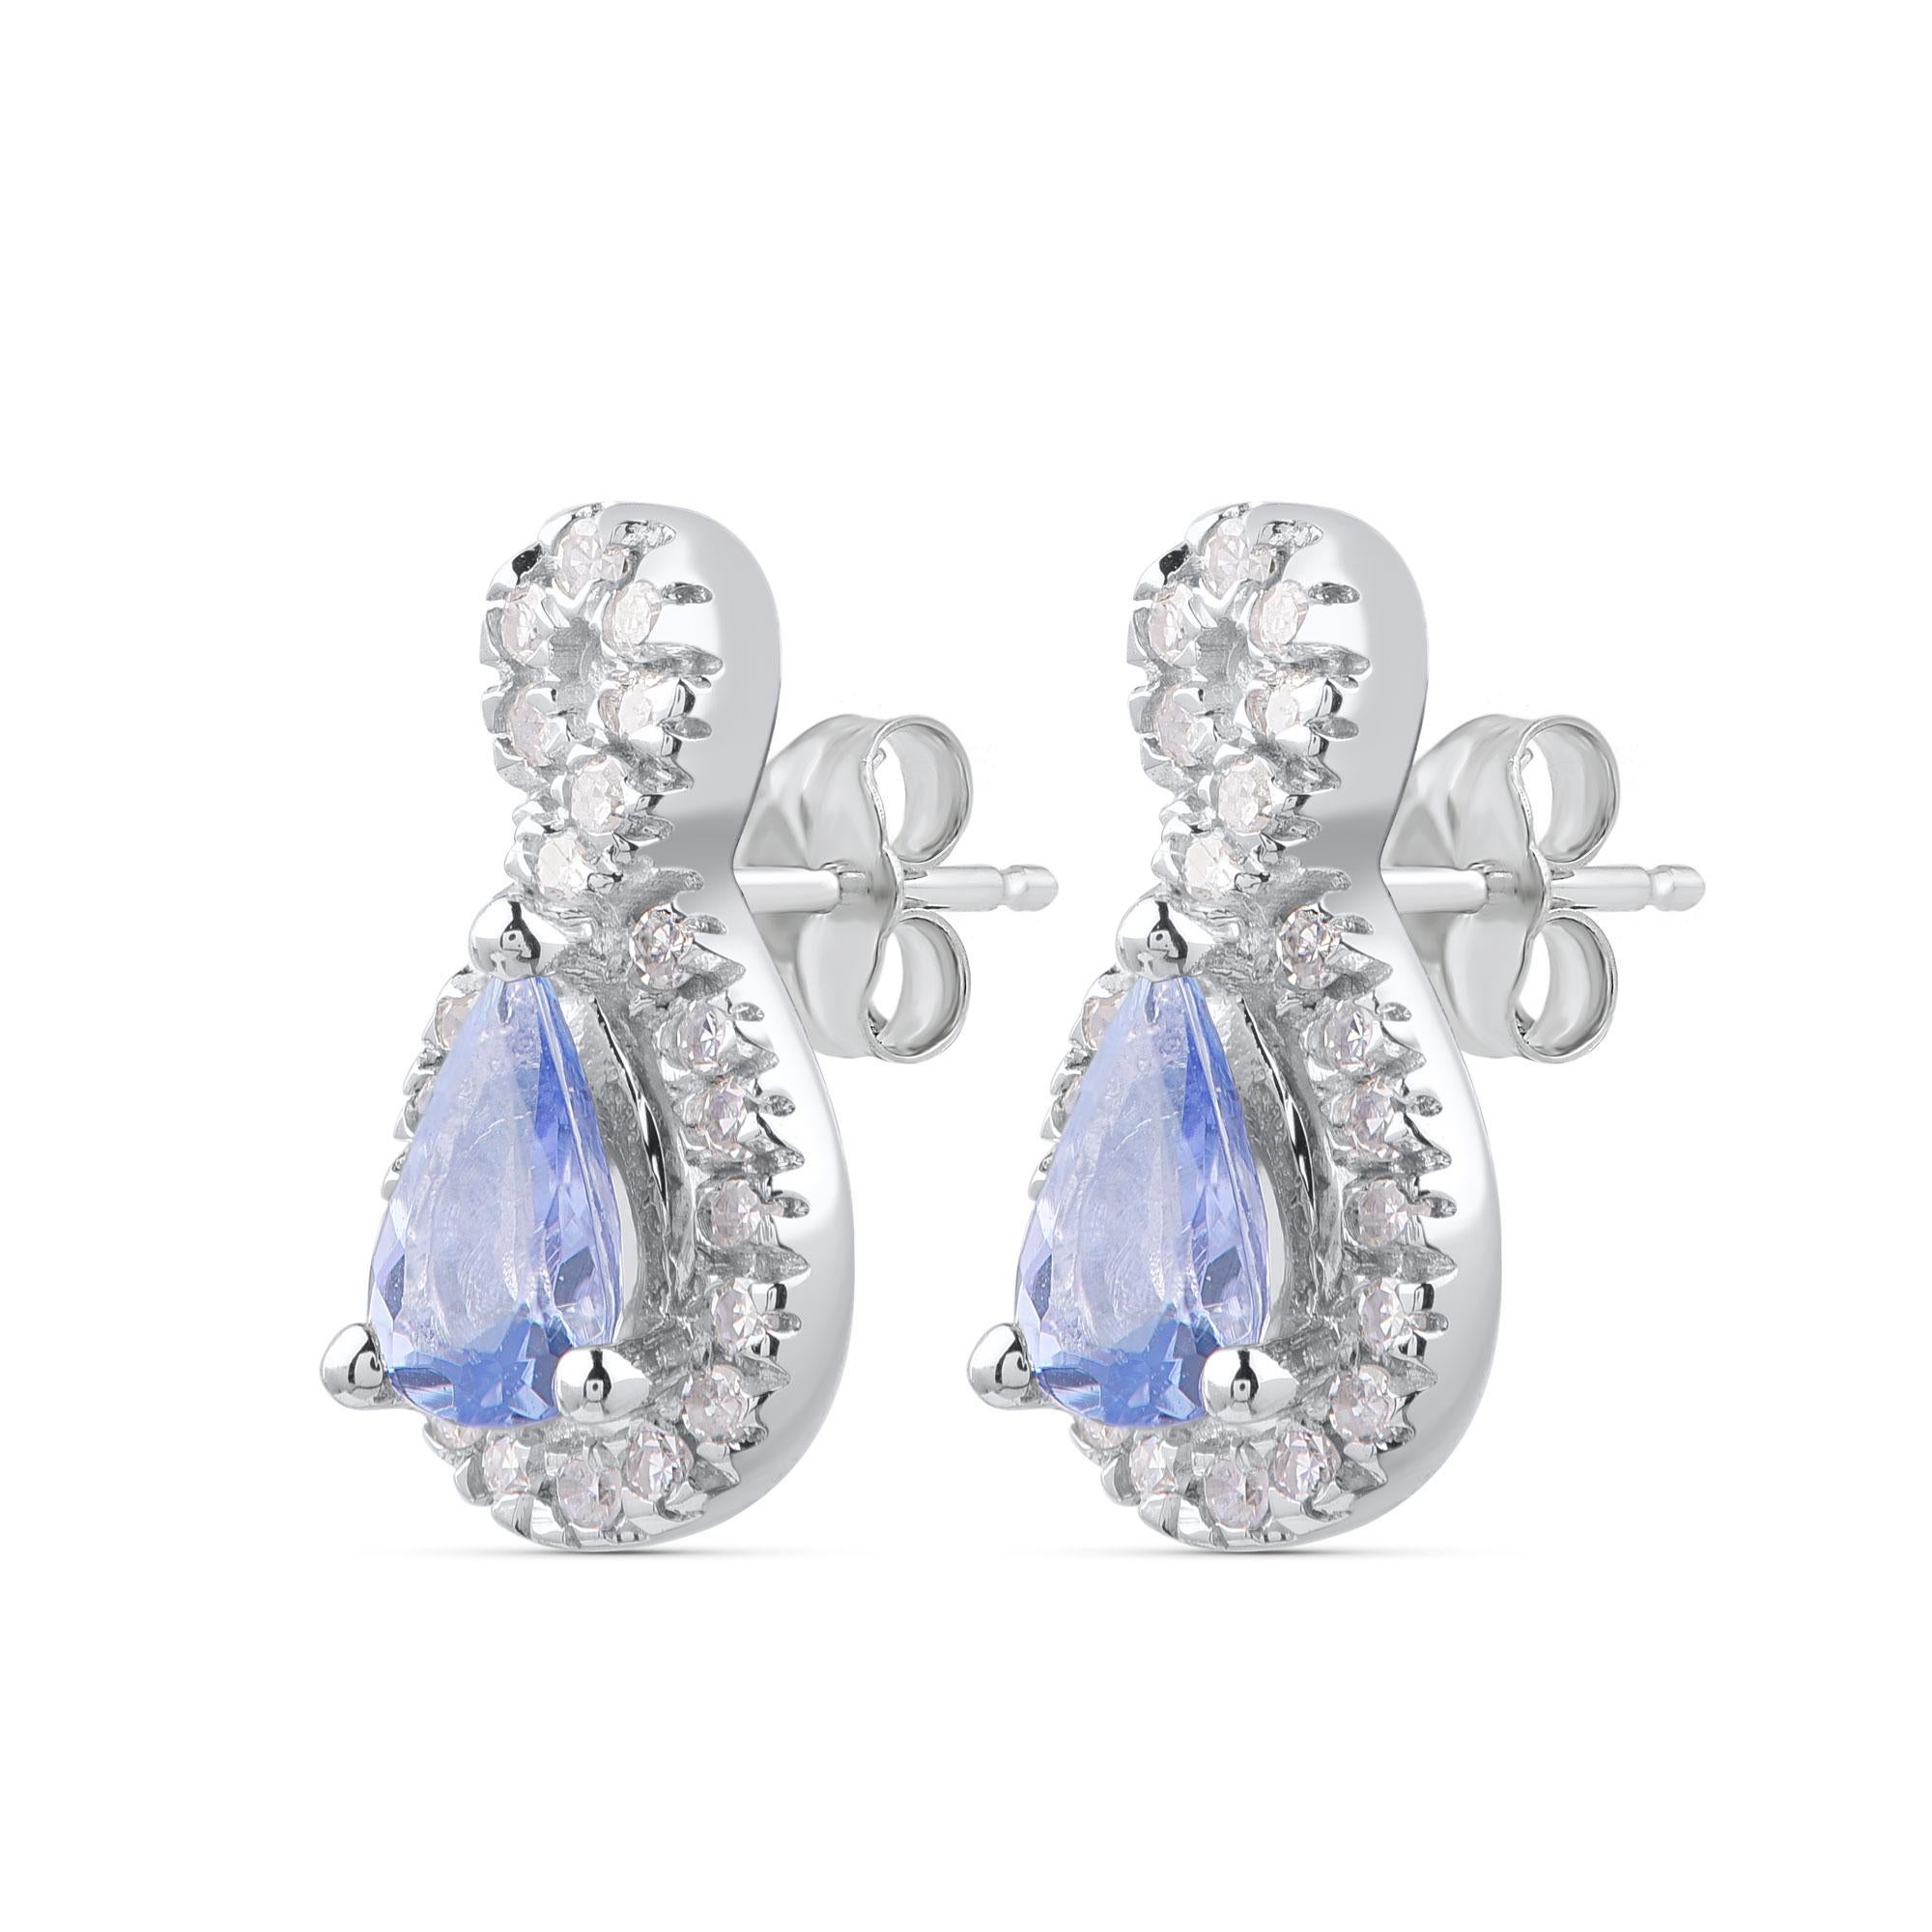 These stunning earrings shine with 44 round diamonds and 2 tanzanite stone elegantly set in prong setting and handcrafted beautifully in 10 kt white gold. The diamond are graded H-I Color, I2 Clarity. 